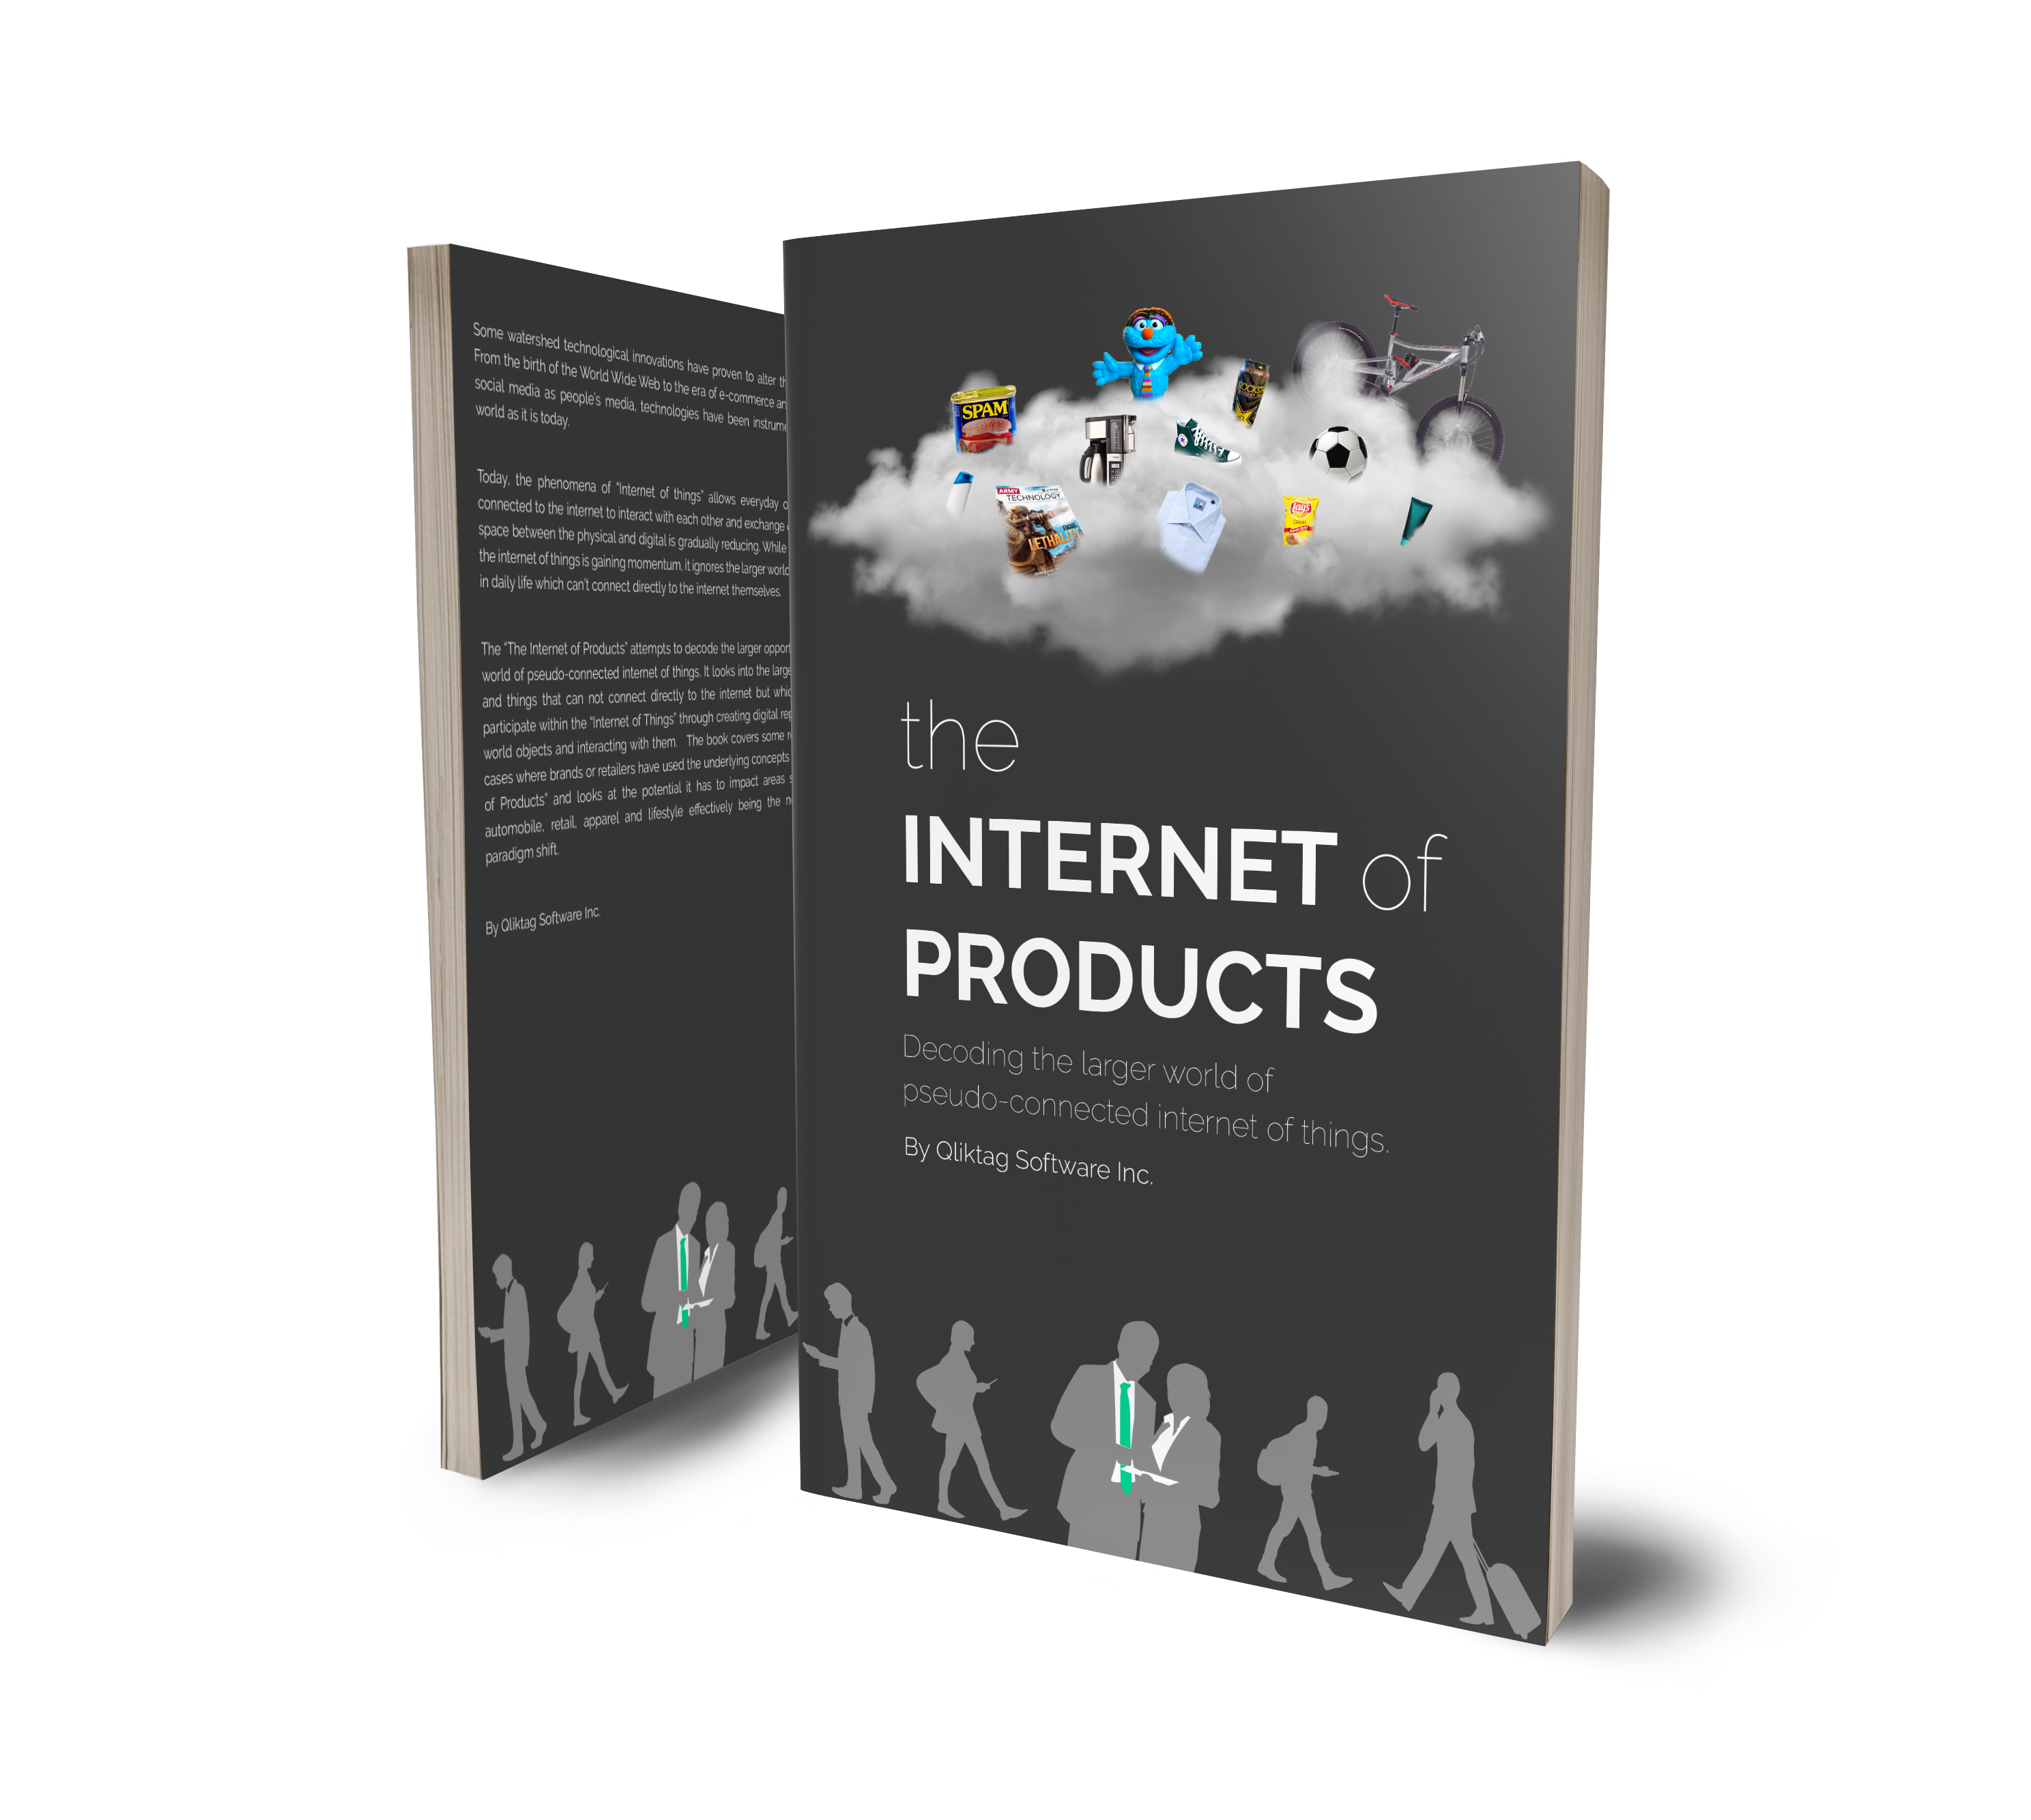 The Internet of Products - Book by Qliktag Software